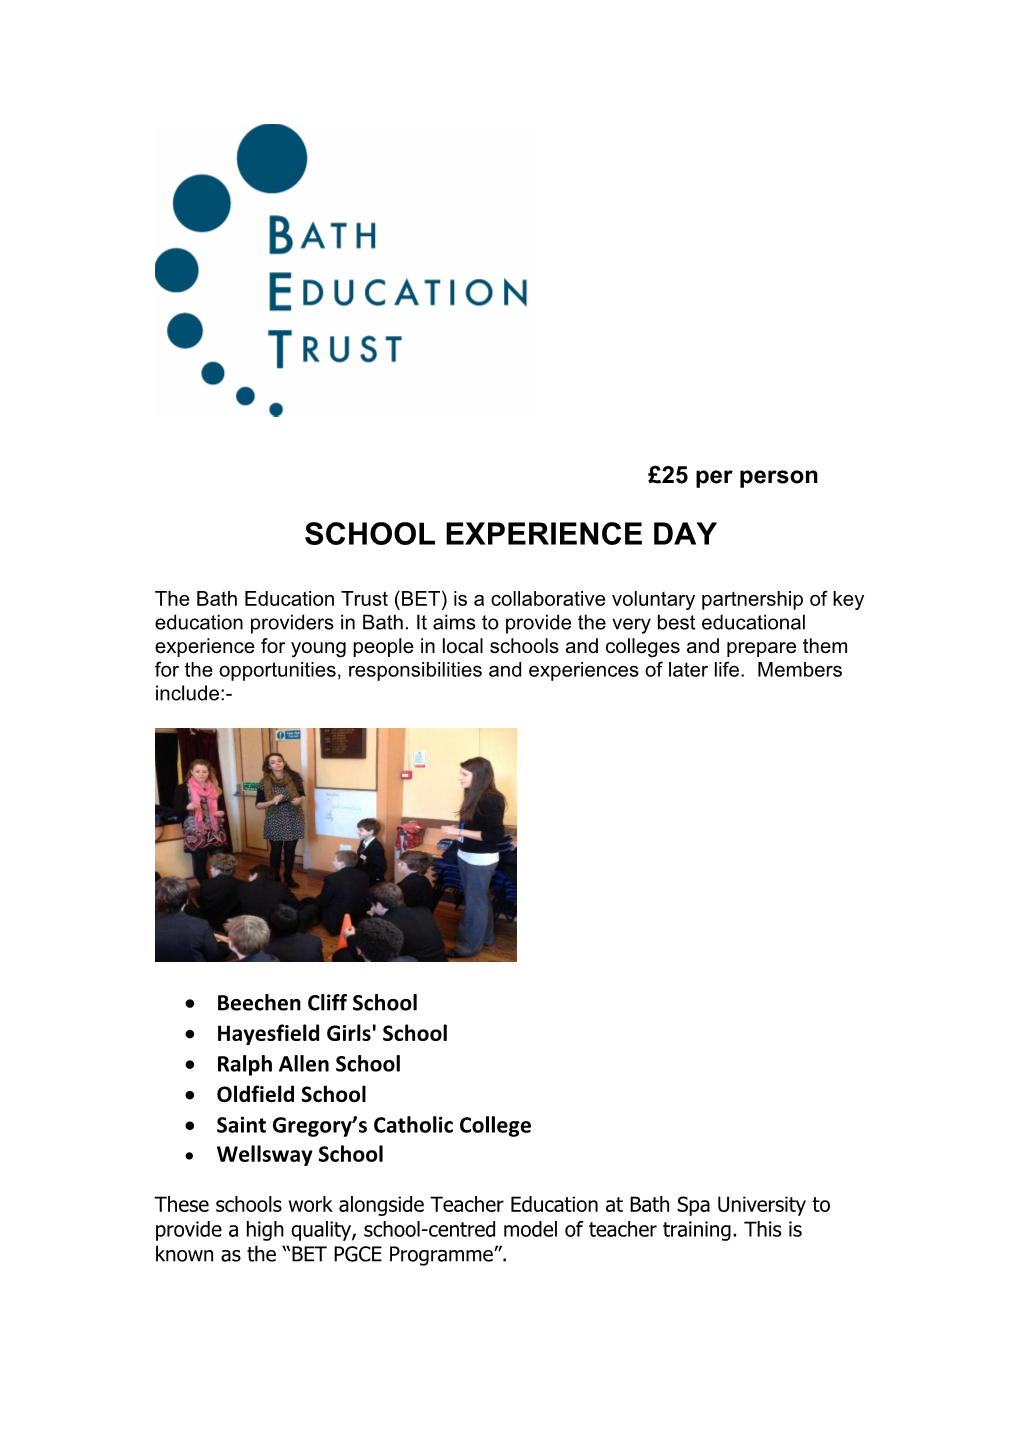 School Experience Day